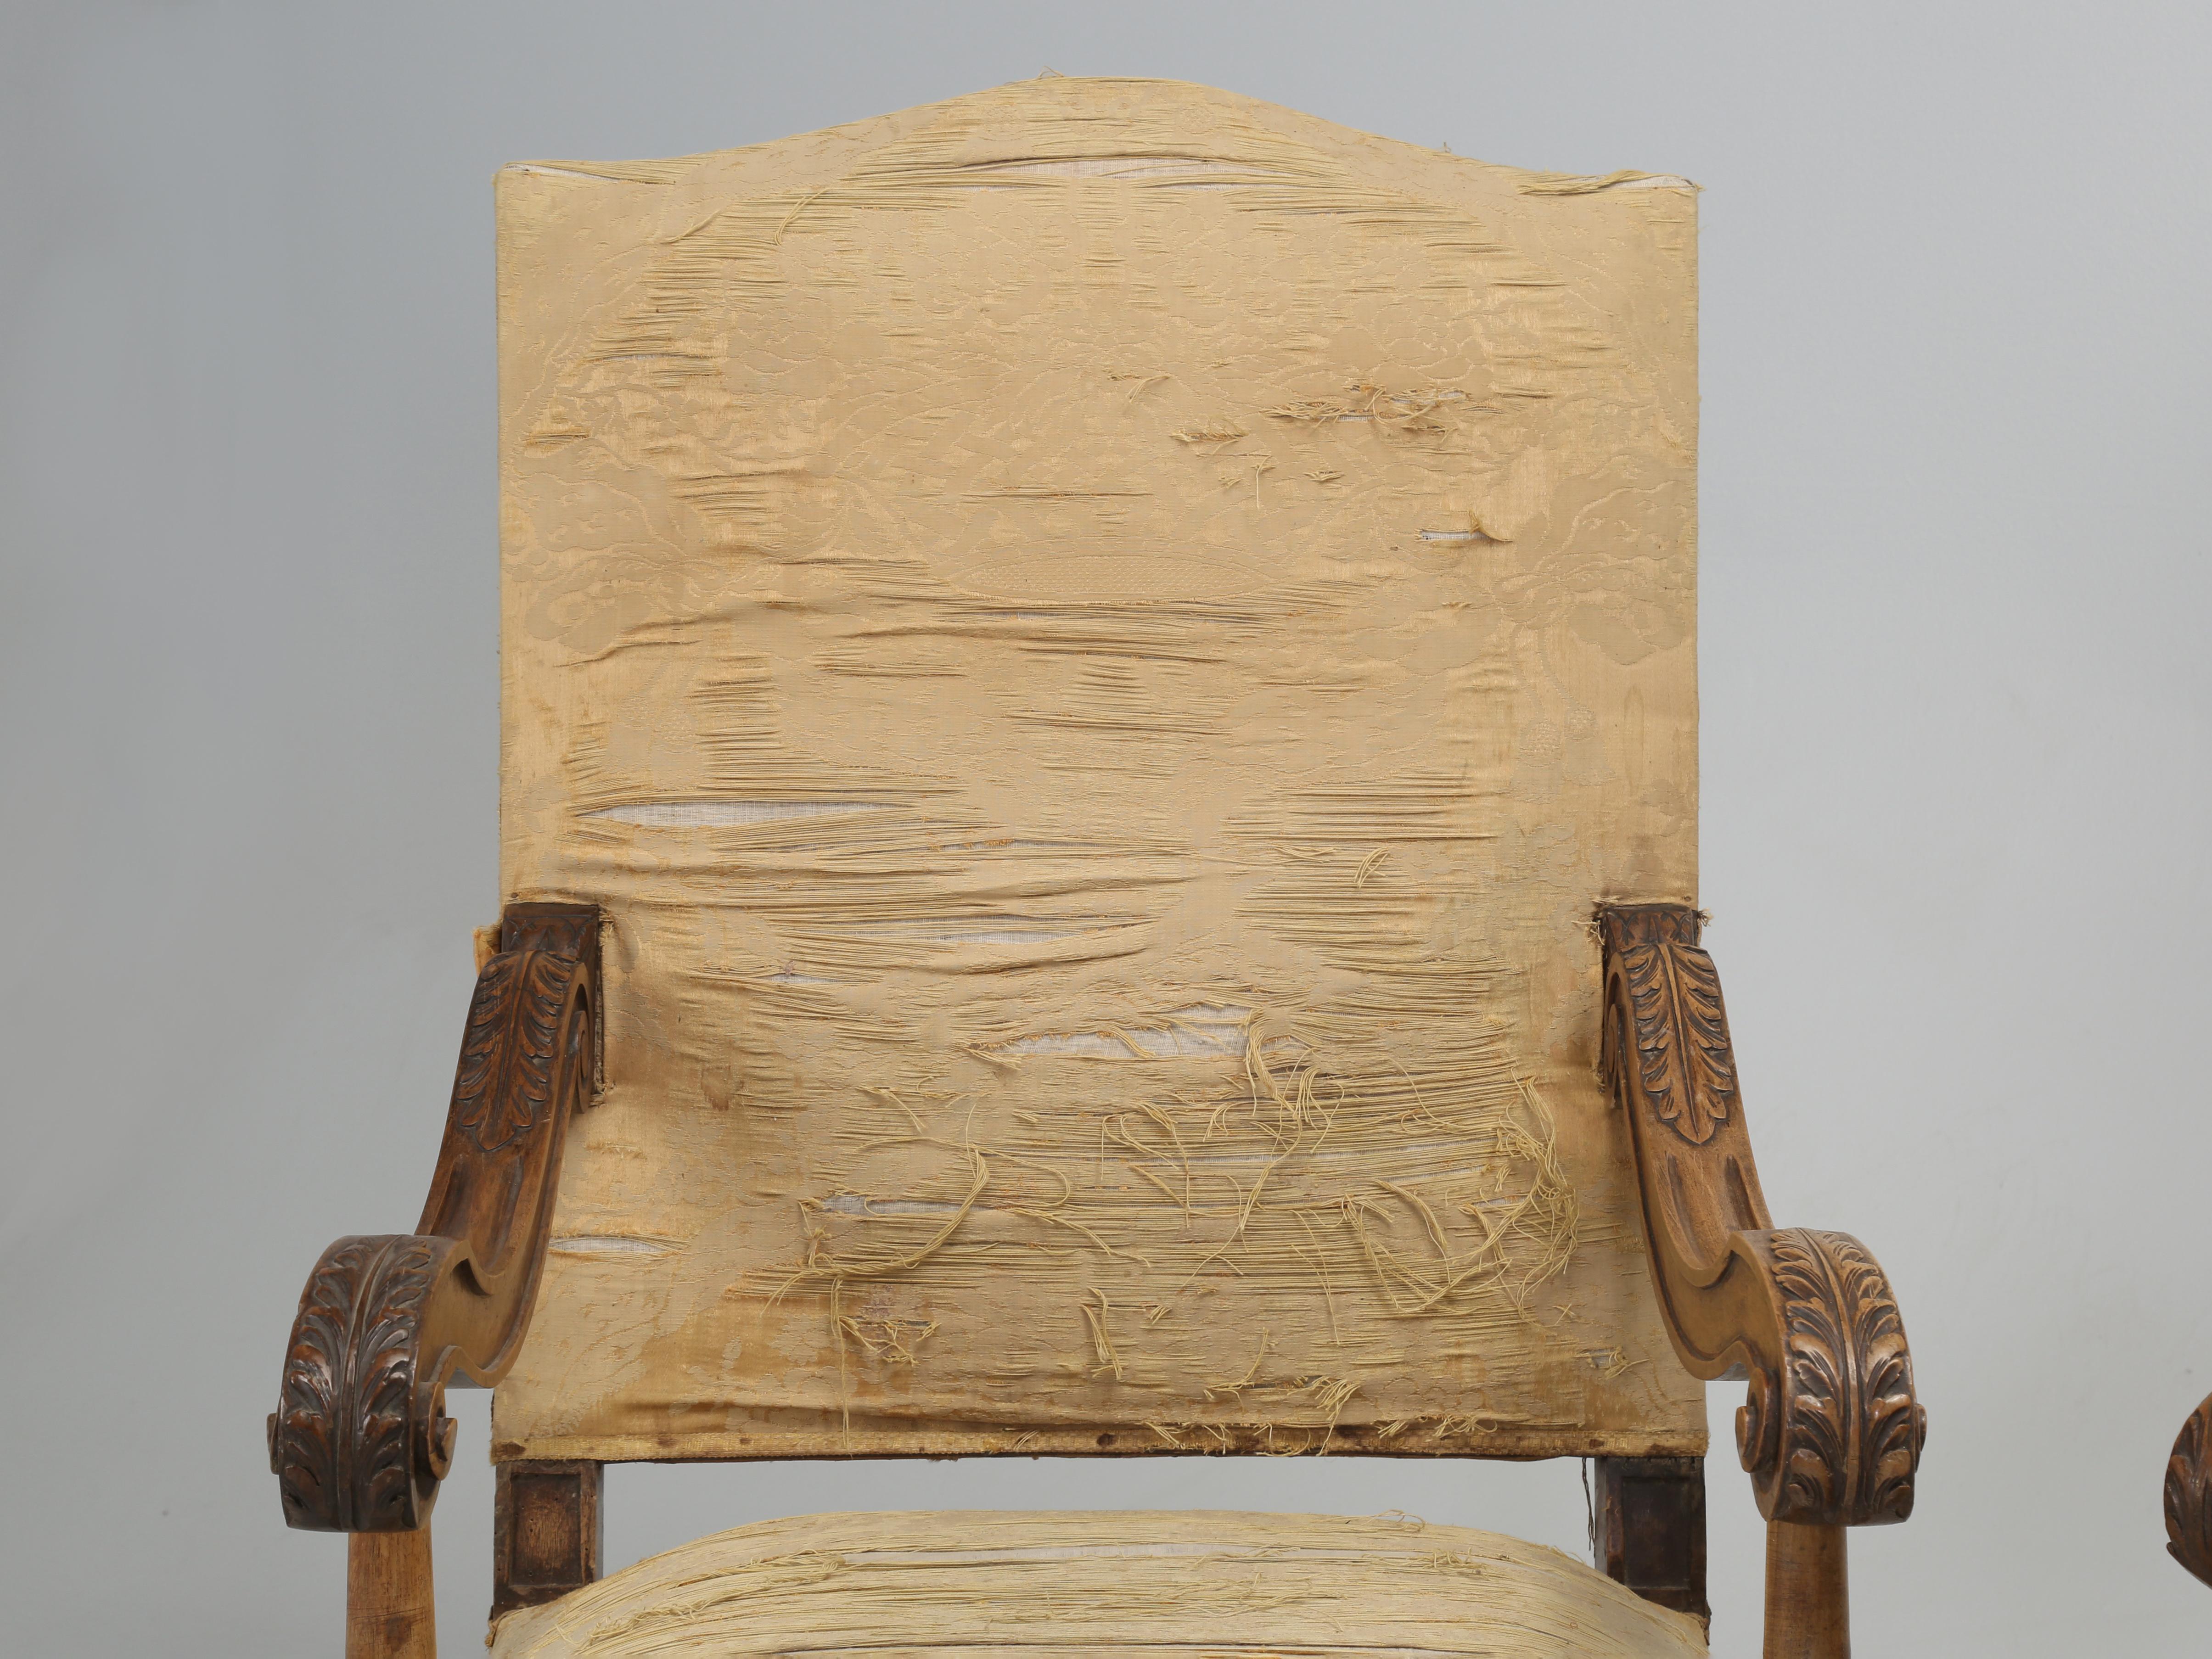 Antique Italian pair of armchairs that were hand carved from solid Walnut and in desperate need of restoration. We have (2) pairs of Matching Italian Armchairs that must have come out of the same Italian home and all are in dire need of a full